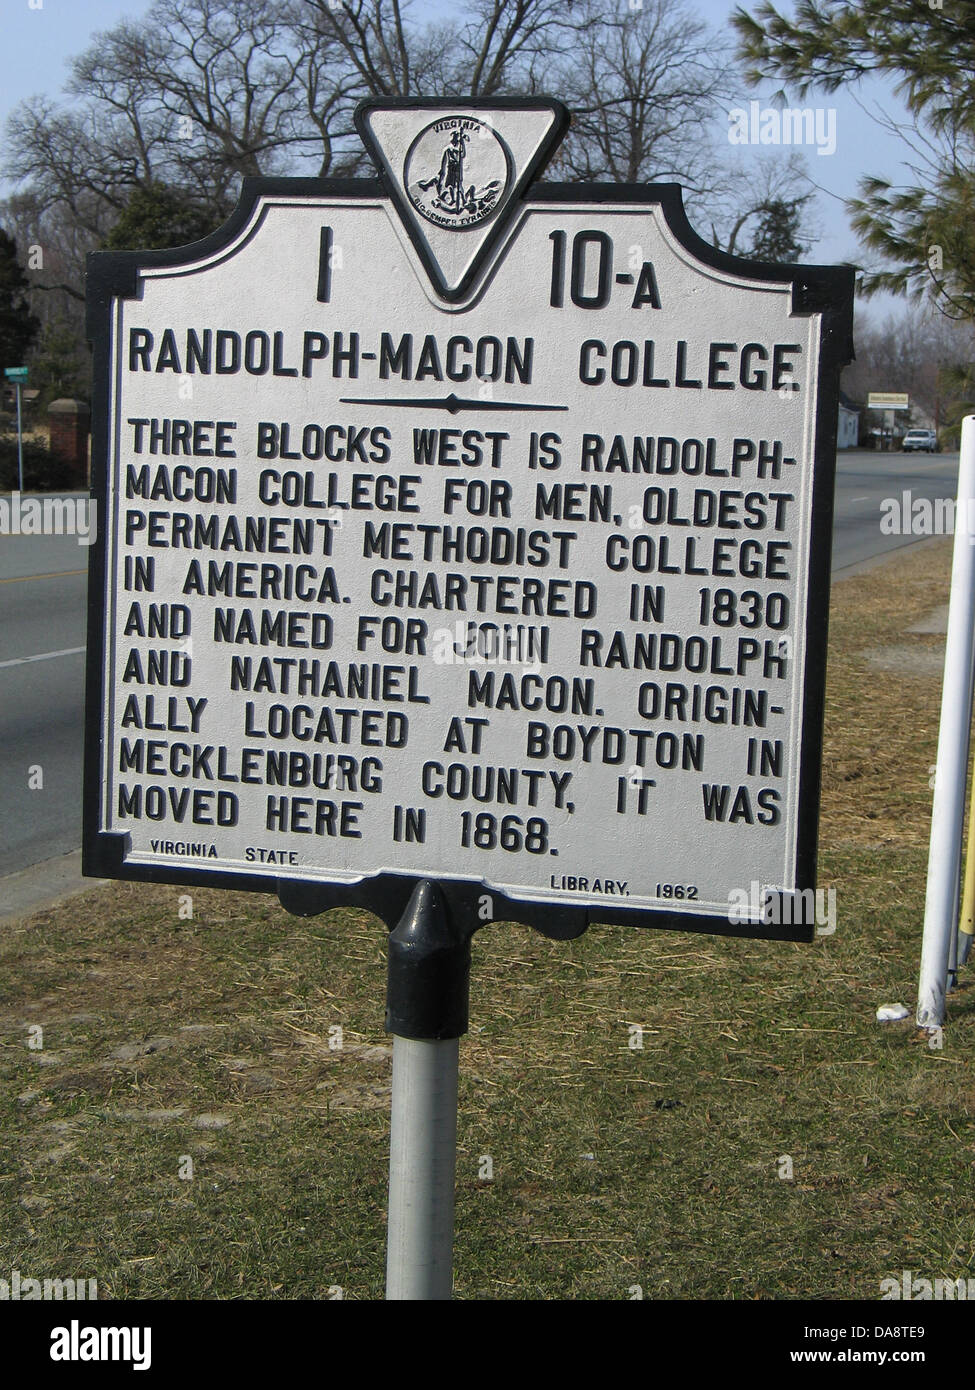 RANDOLPH-MACON COLLEGE Three blocks west is Randolph-Macon College for men, oldest permanent Methodist college in America. Chartered in 1830 and named for John Randolph and Nathaniel Macon. Originally located at Boydton in Mecklenburg County, it was move here in 1868. Virginia State Library, 1962 Stock Photo